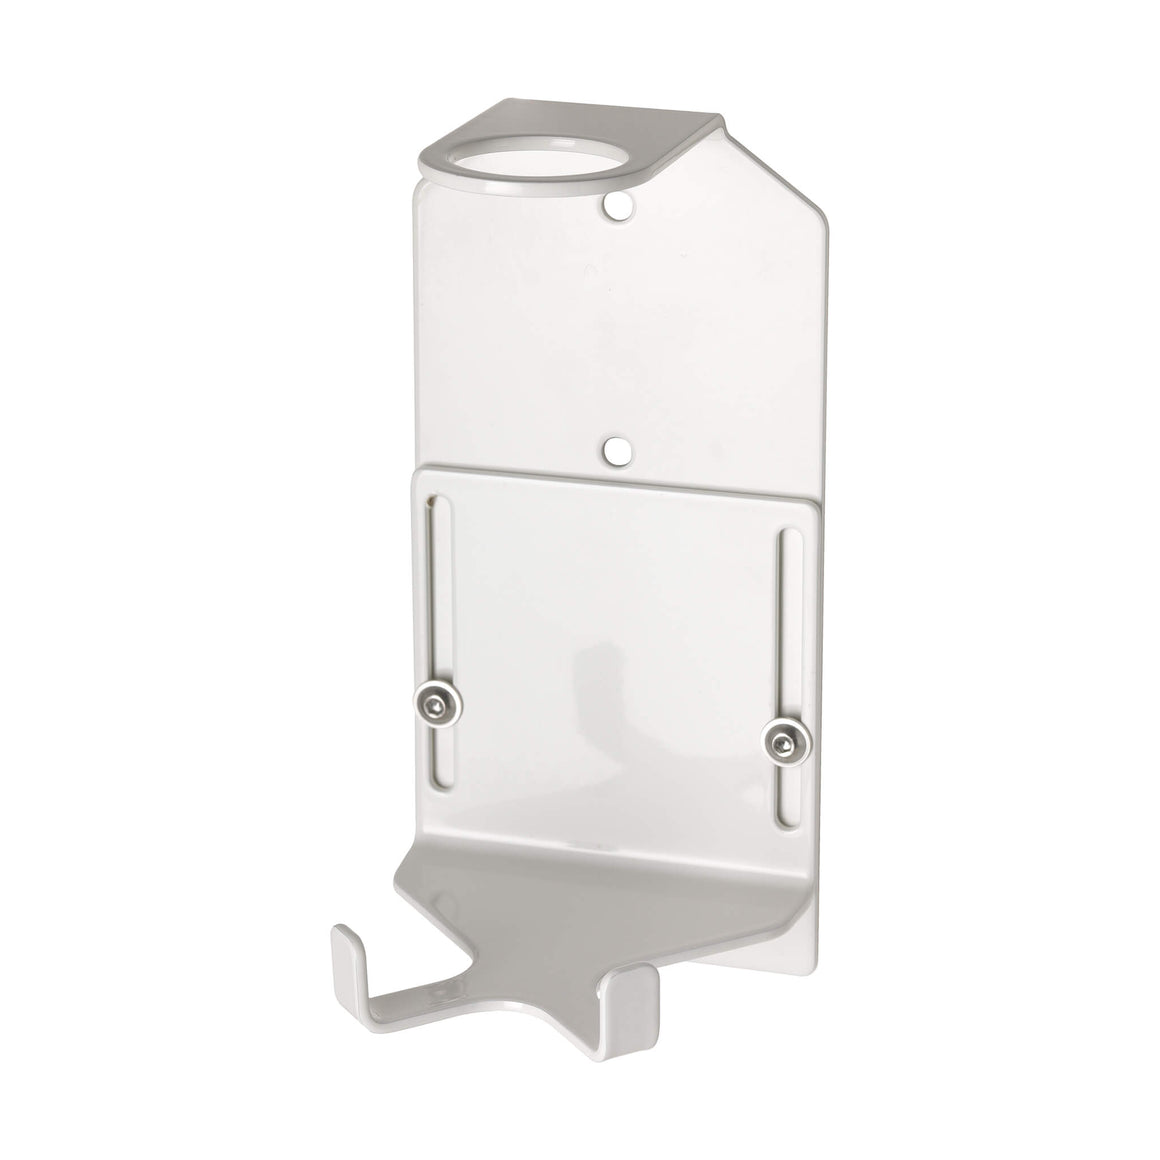 SALE ITEM - Single 500ml Security Wall-Mounted Holder - Satin White